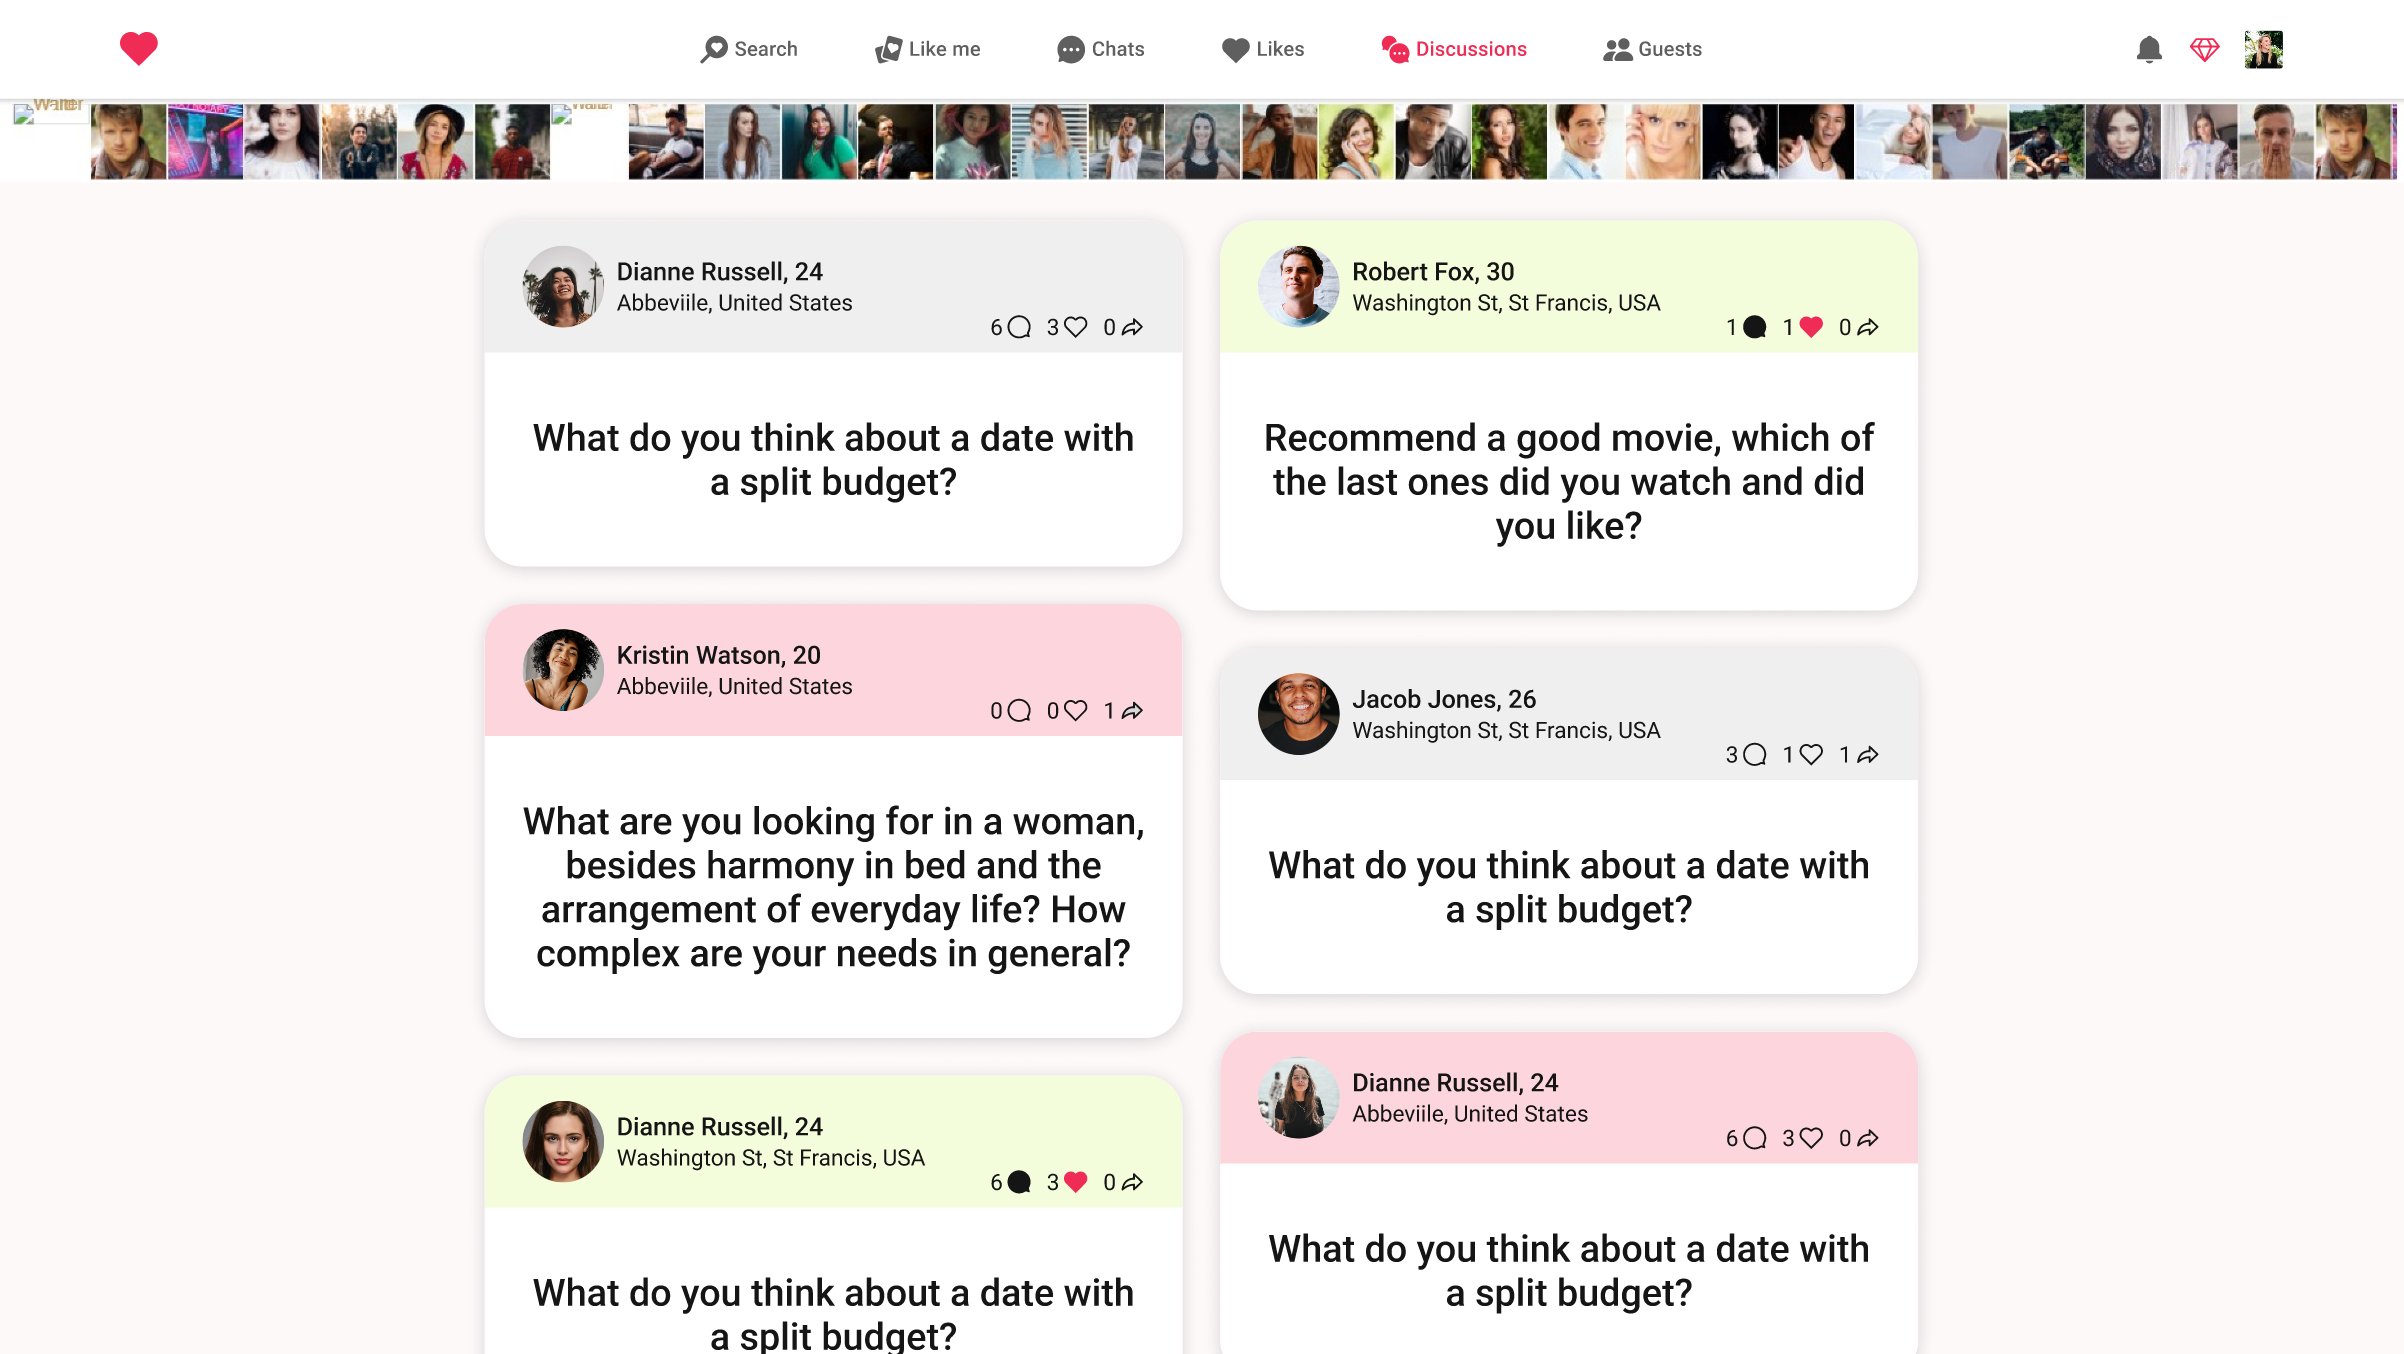 Prototype of Questions after Matching — More conversations, more paid subscriptions